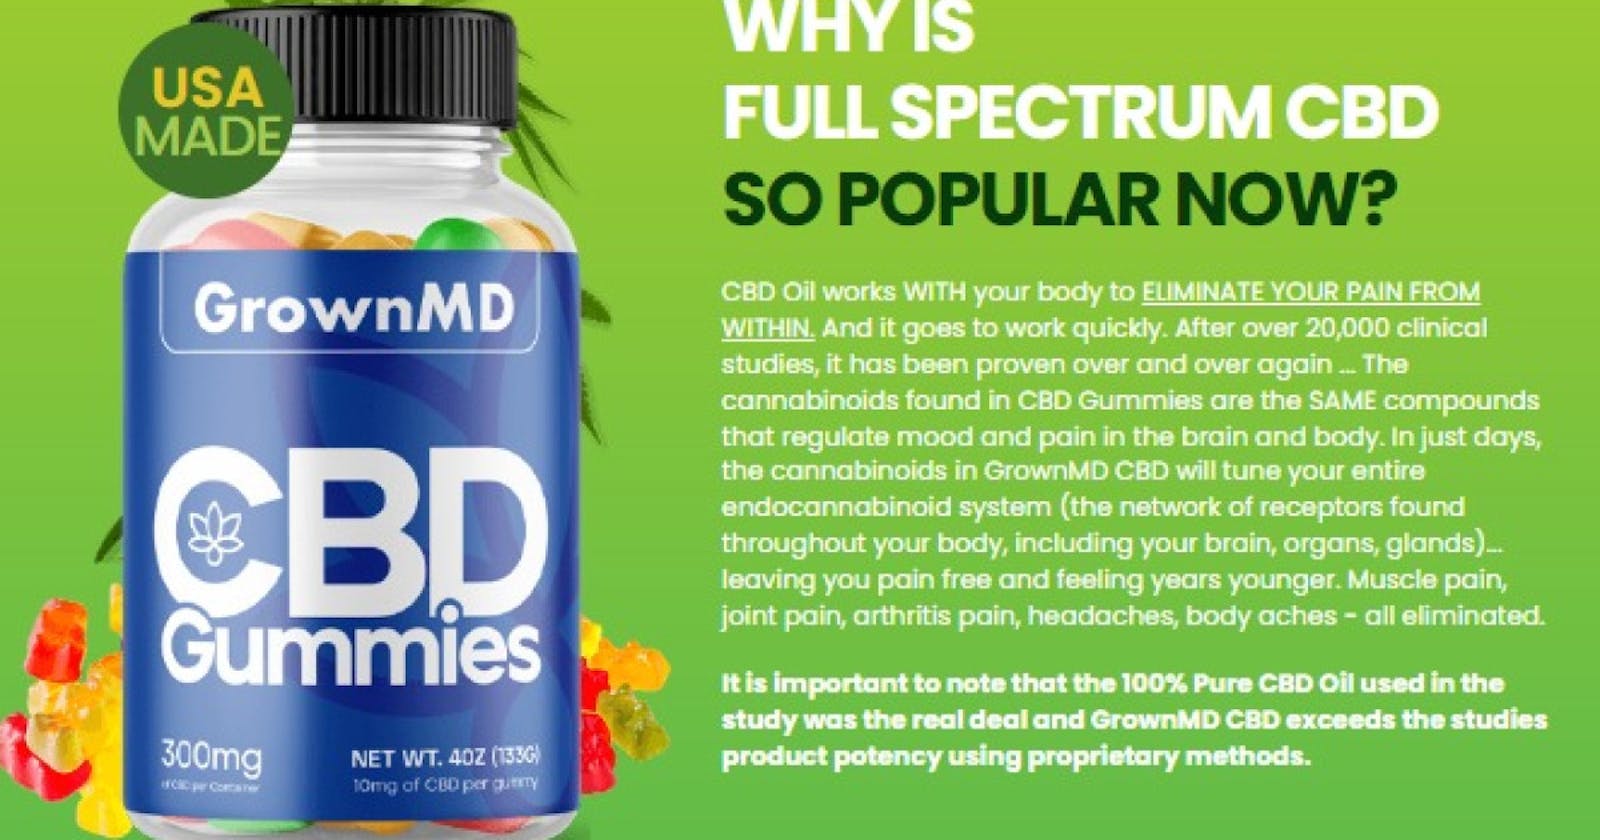 Vegan and Gluten-Free Options Available: GrownMD CBD Gummies for Everyone!